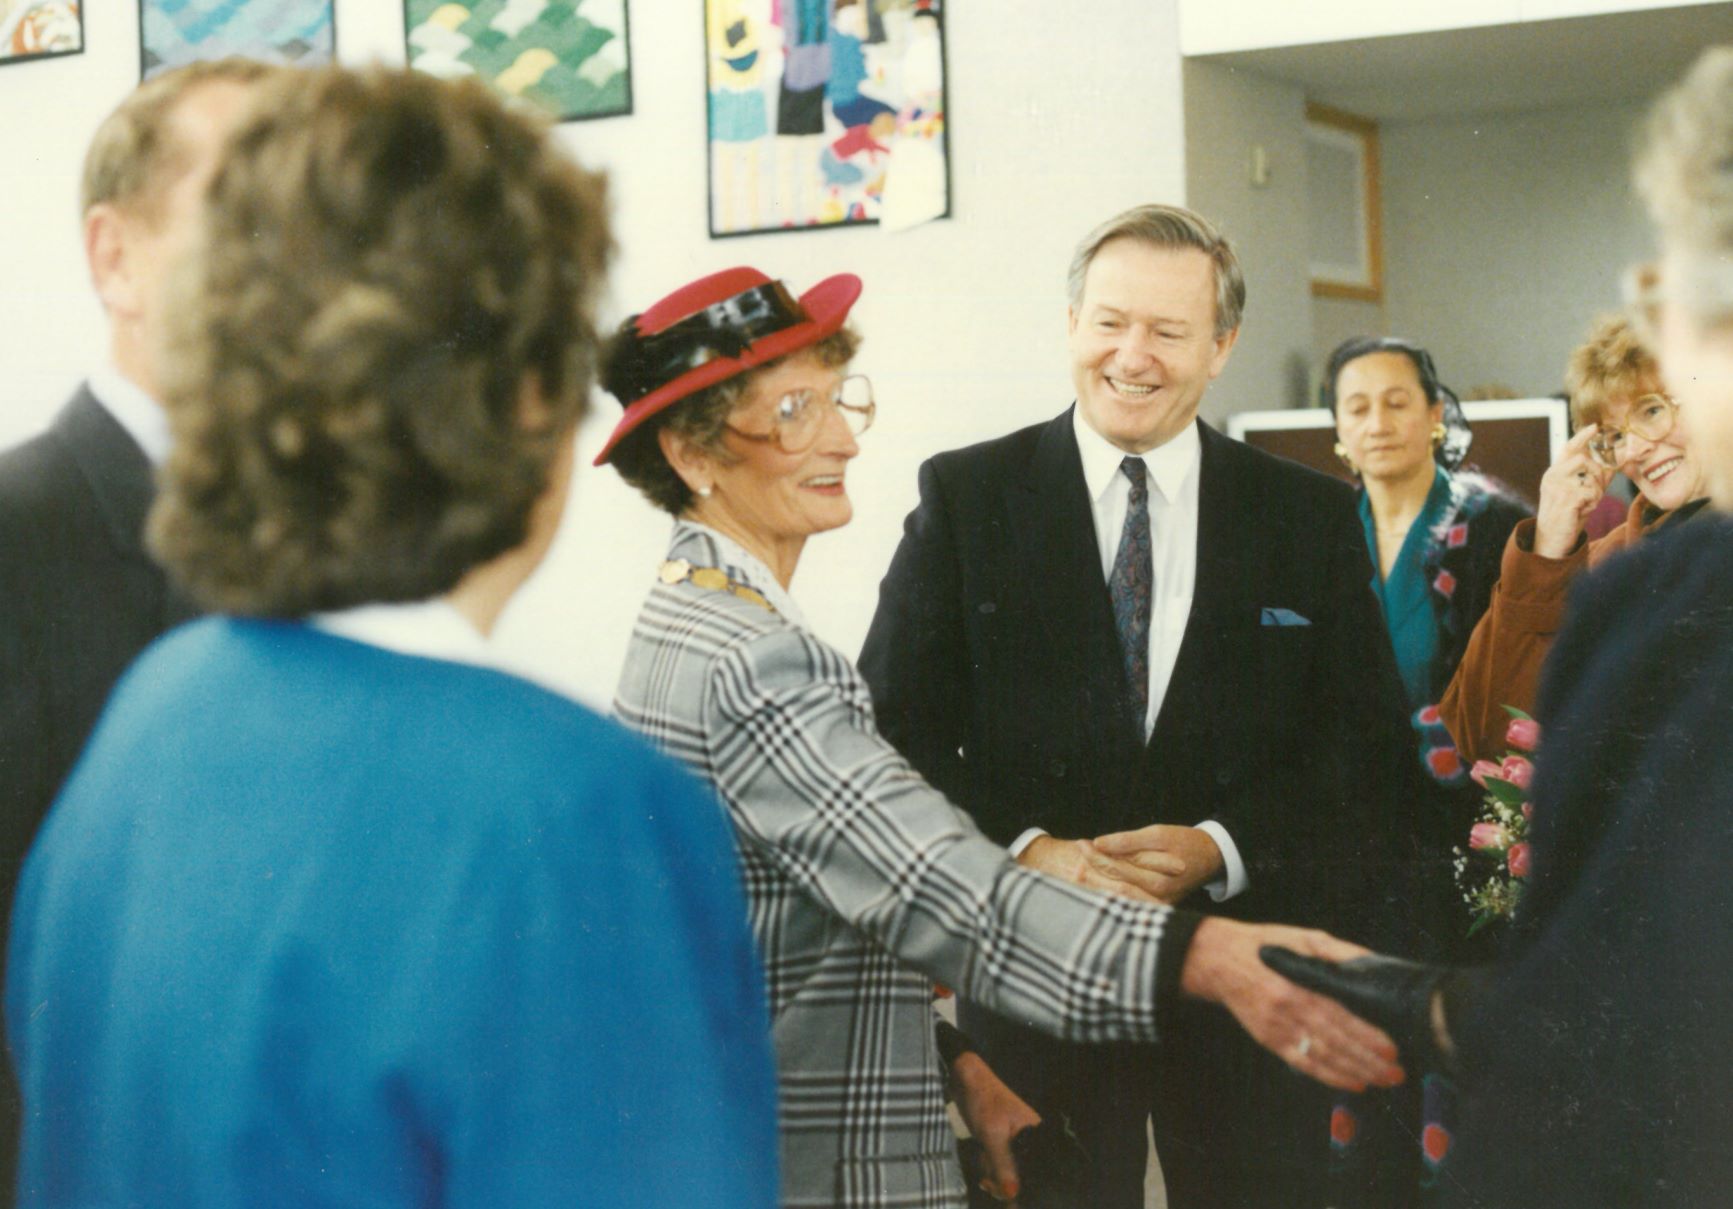  Joan Williamson and Jim Bolger at the opening ceremony of the Great Lake Centre in 1992.  